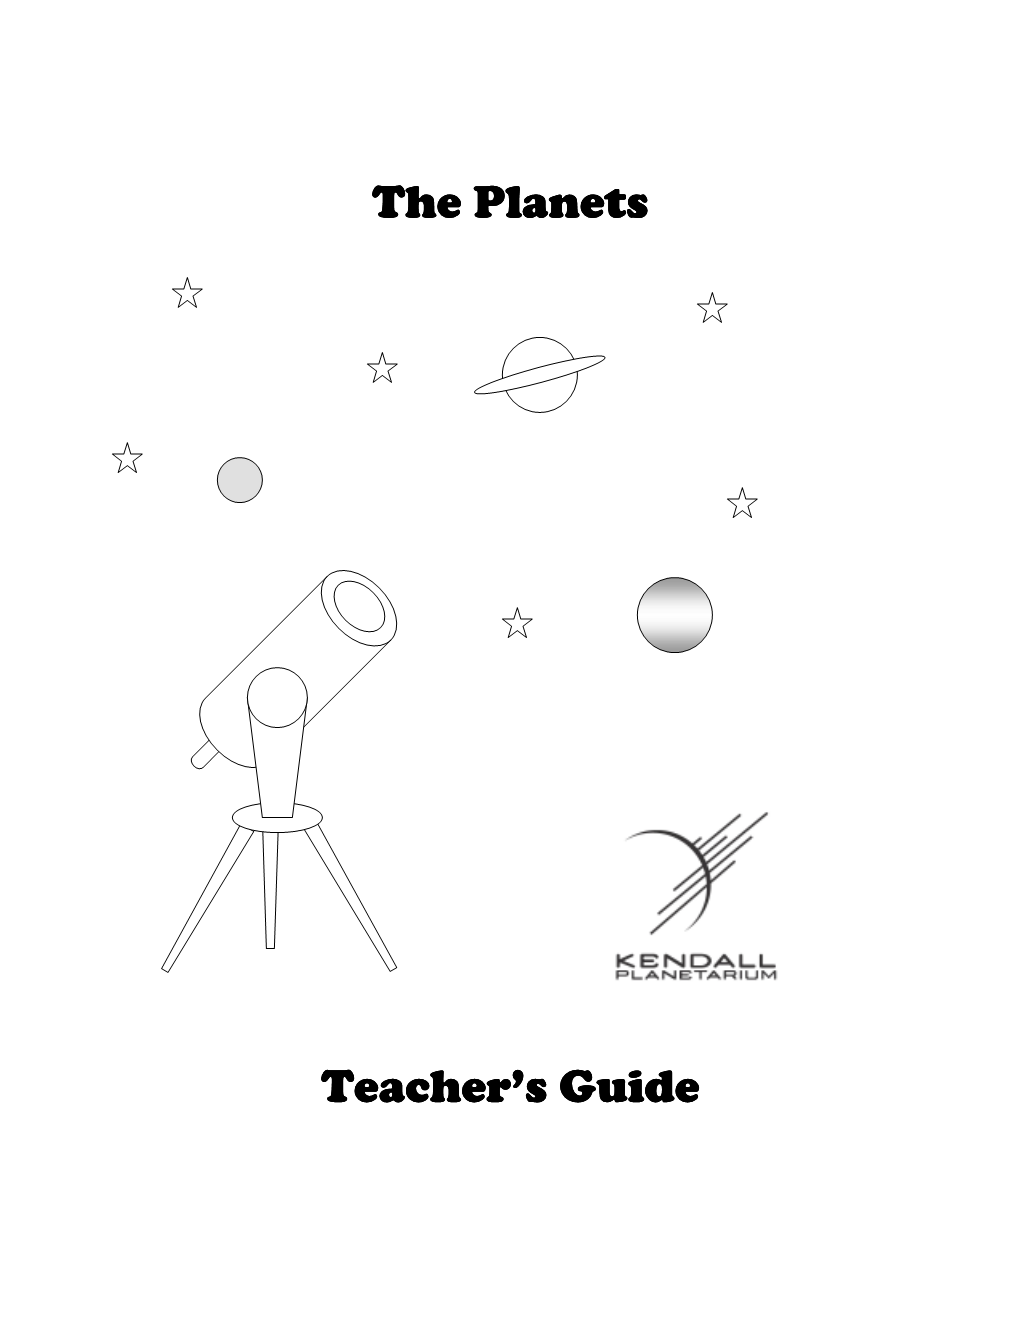 The Planets the Planets Teacher's Guide Teacher's Guide